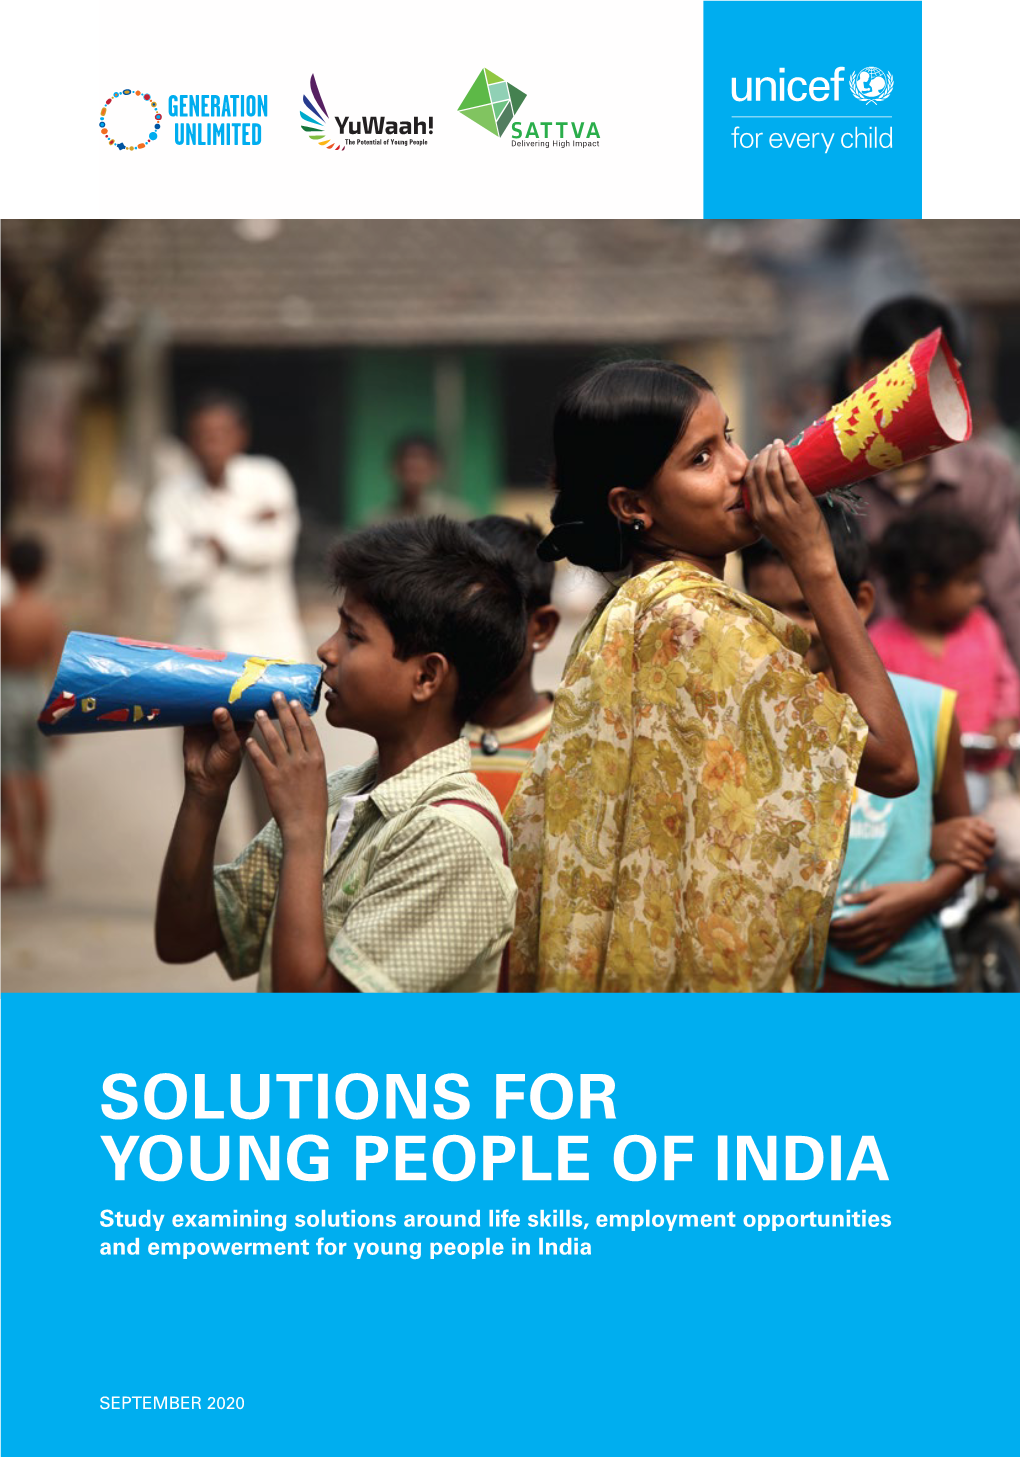 The Solutions for Young People of India Report